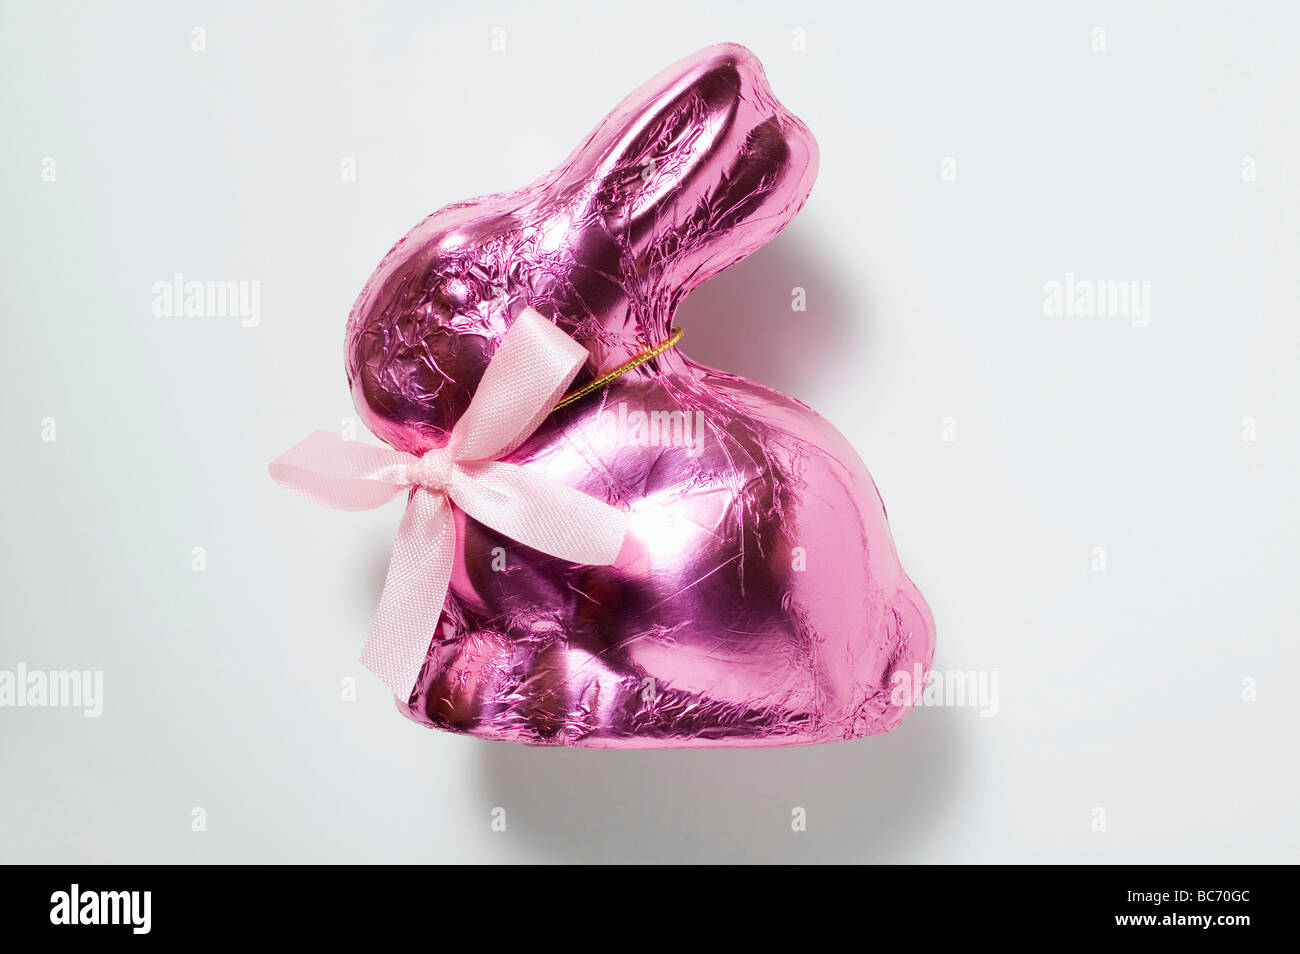 Chocolate bunny in pink foil - Stock Photo